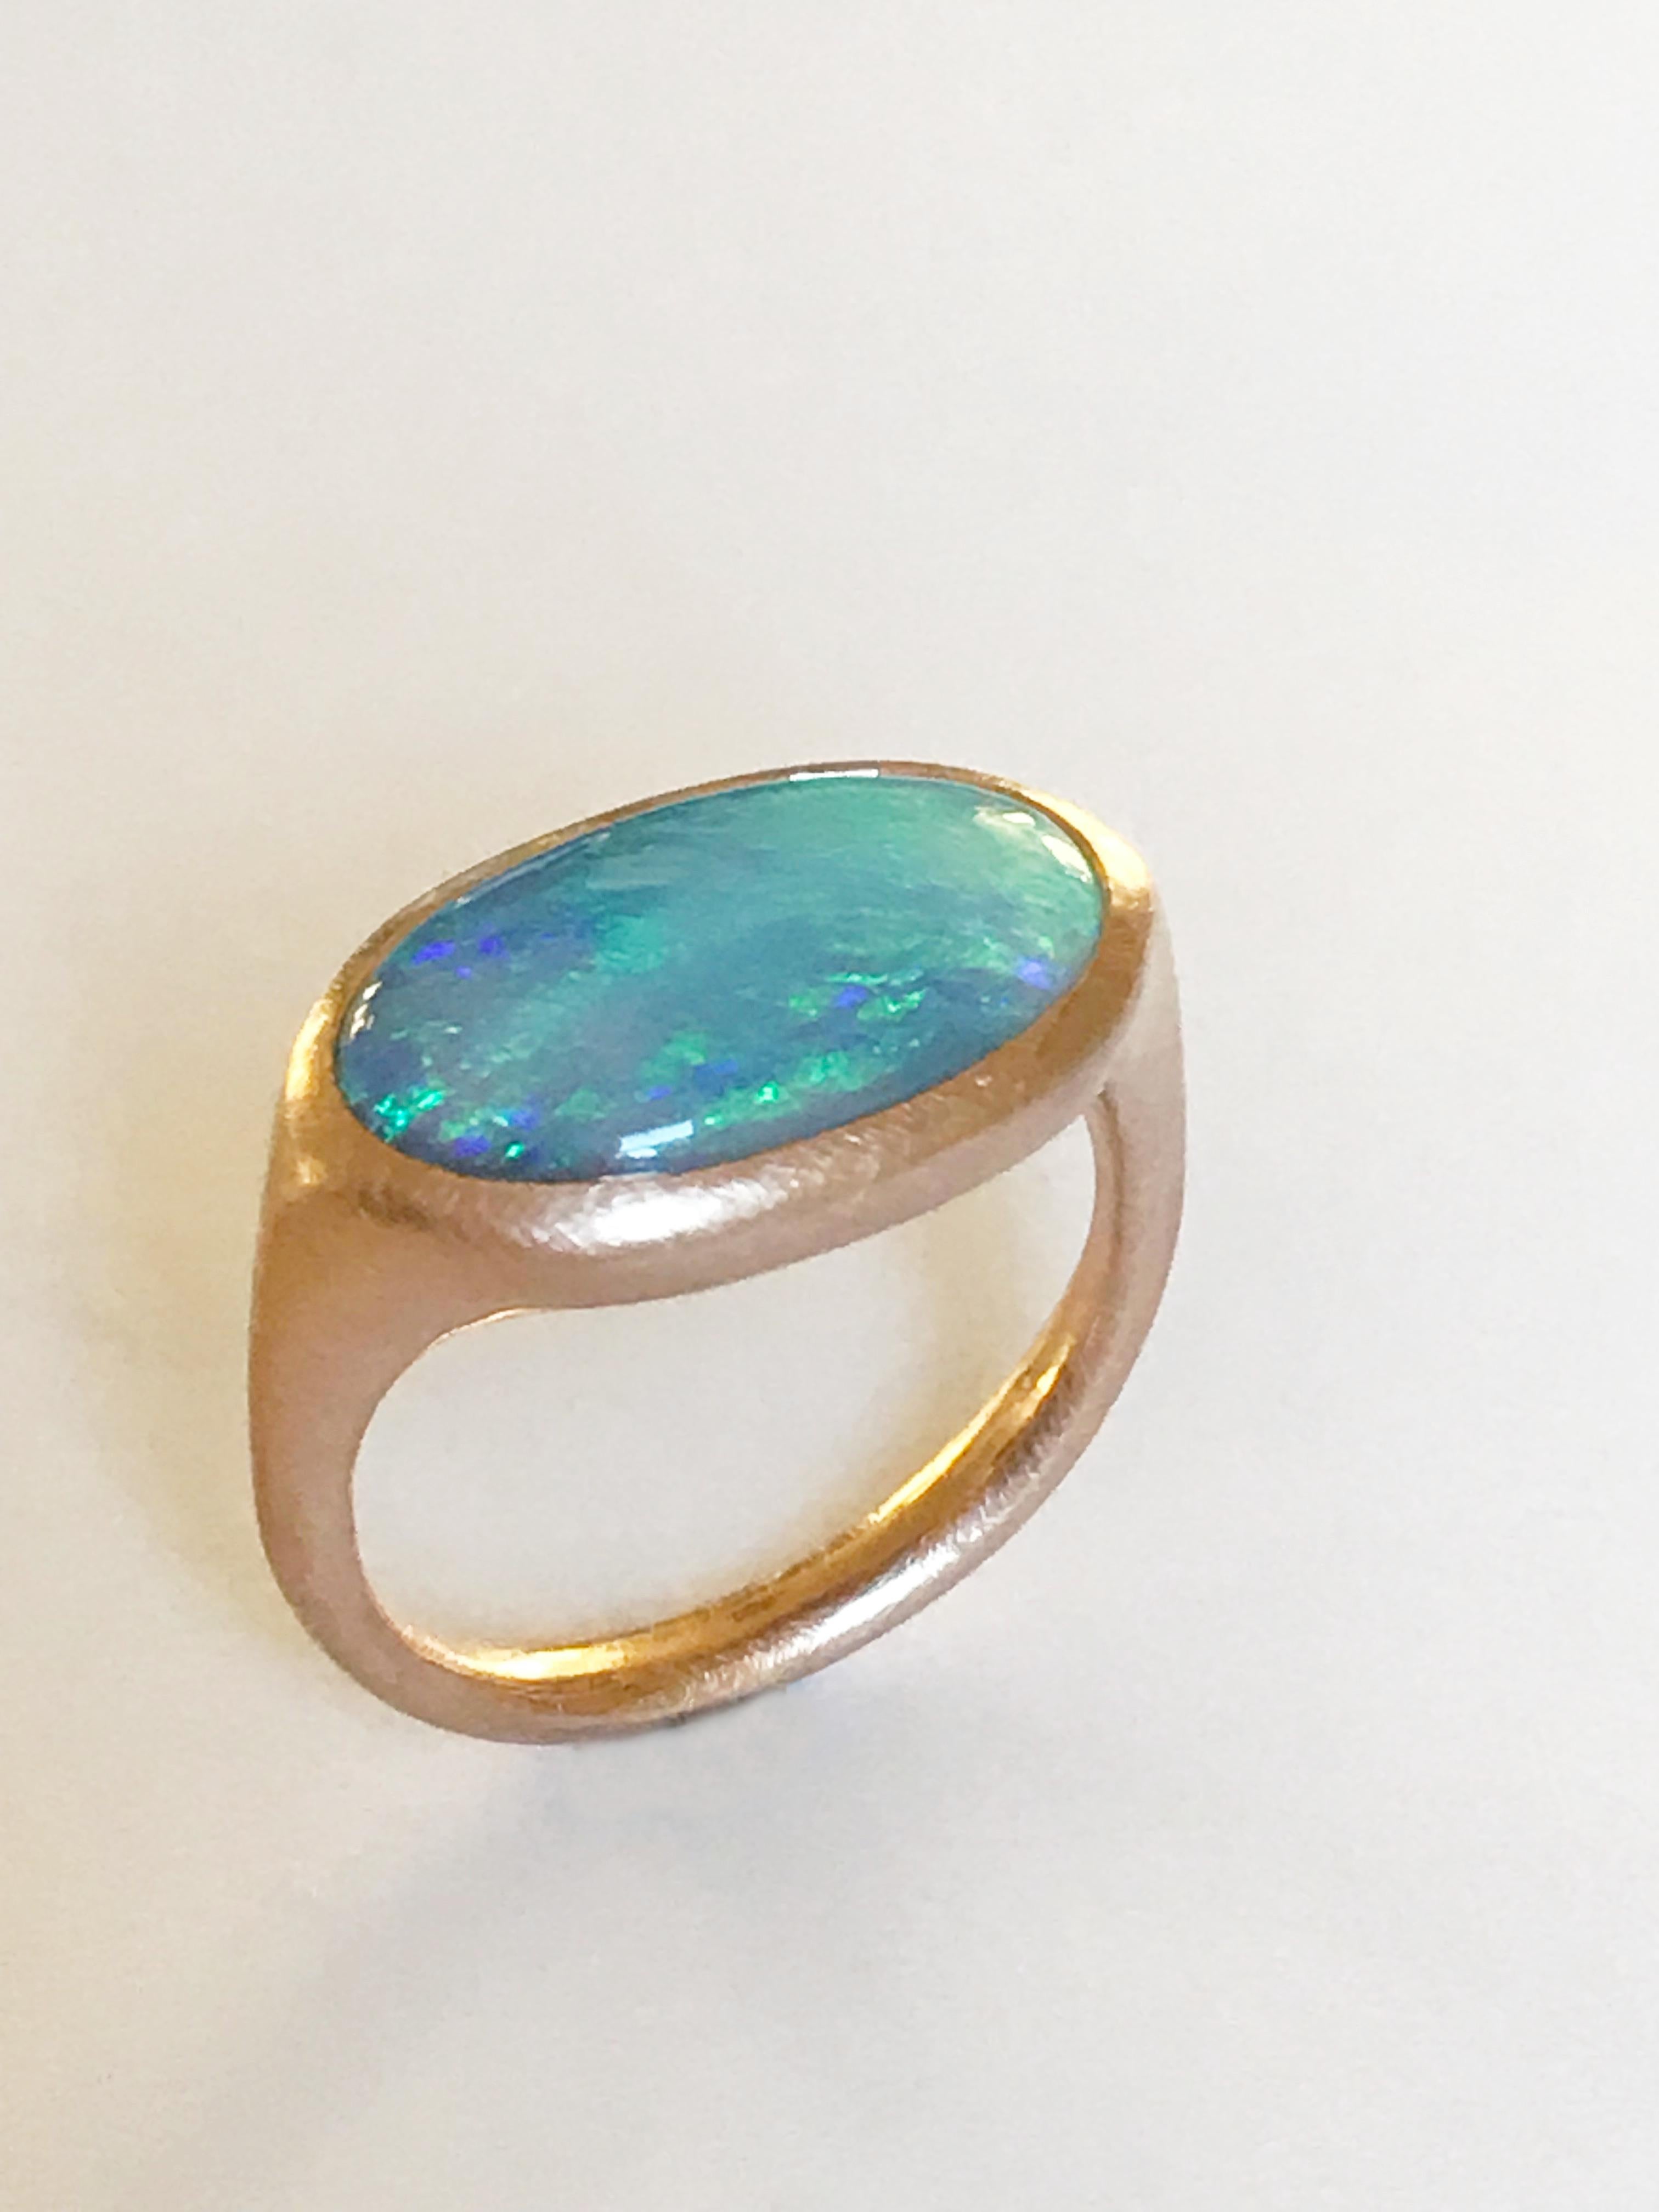 Dalben design One of a kind 18 kt rose gold matte finishing ring with a 3,78 carat bezel-set  oval Lightning Ridge Australian Opal  .  
The stone has light blue green pastel colors .
Ring size 7 1/4 - EU 55 re-sizable to most finger sizes.  
Bezel